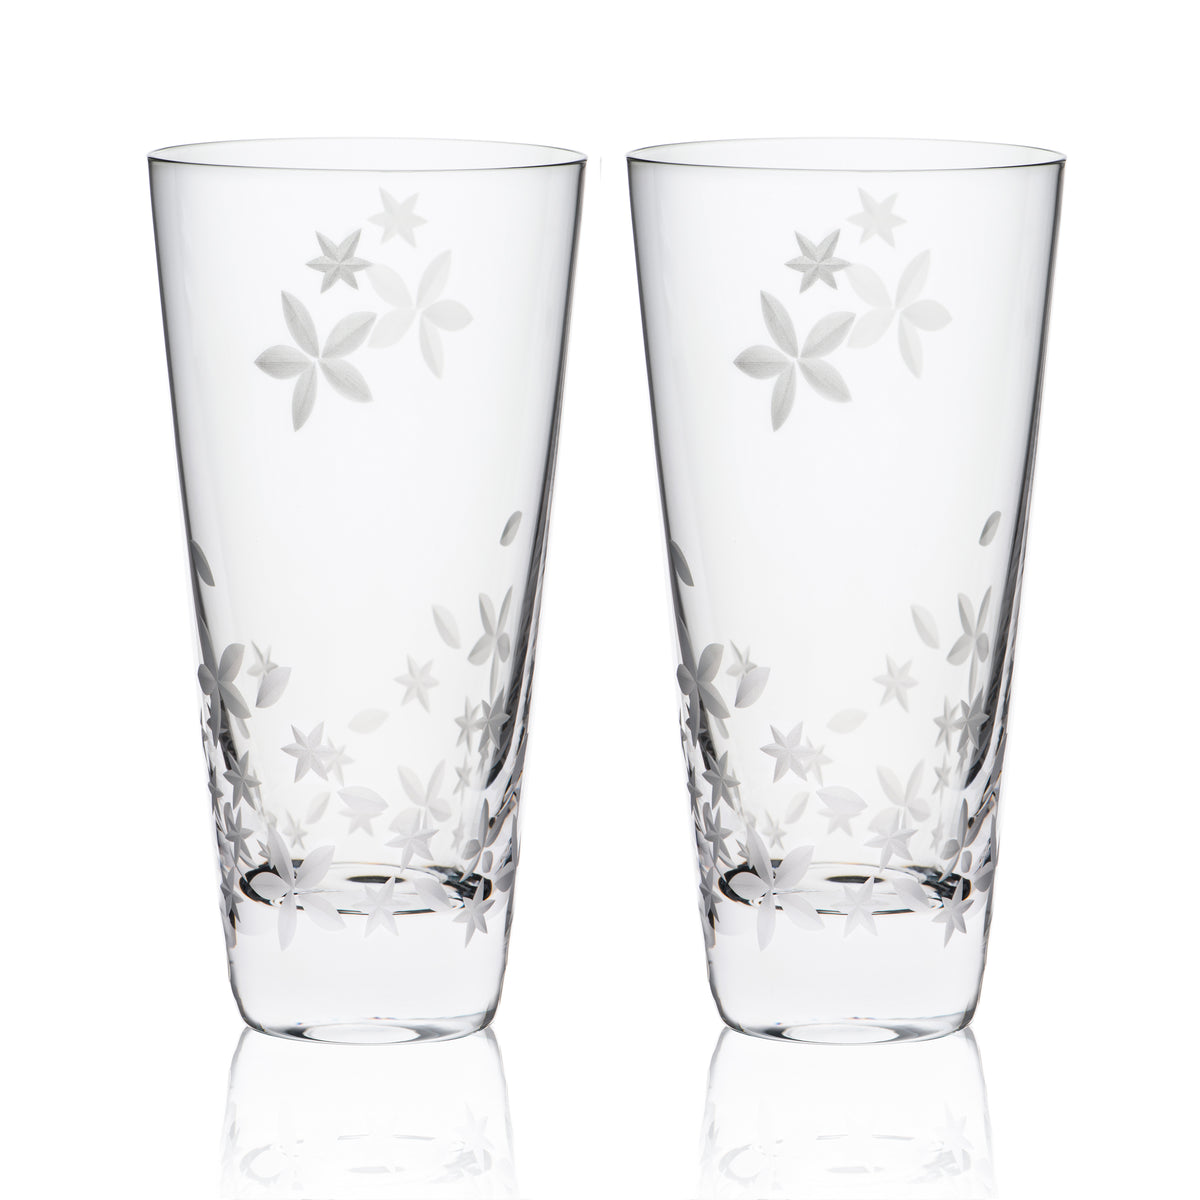 Chatham Bloom highball glasses, etched floral pattern on lead-free crystal by Caskata.